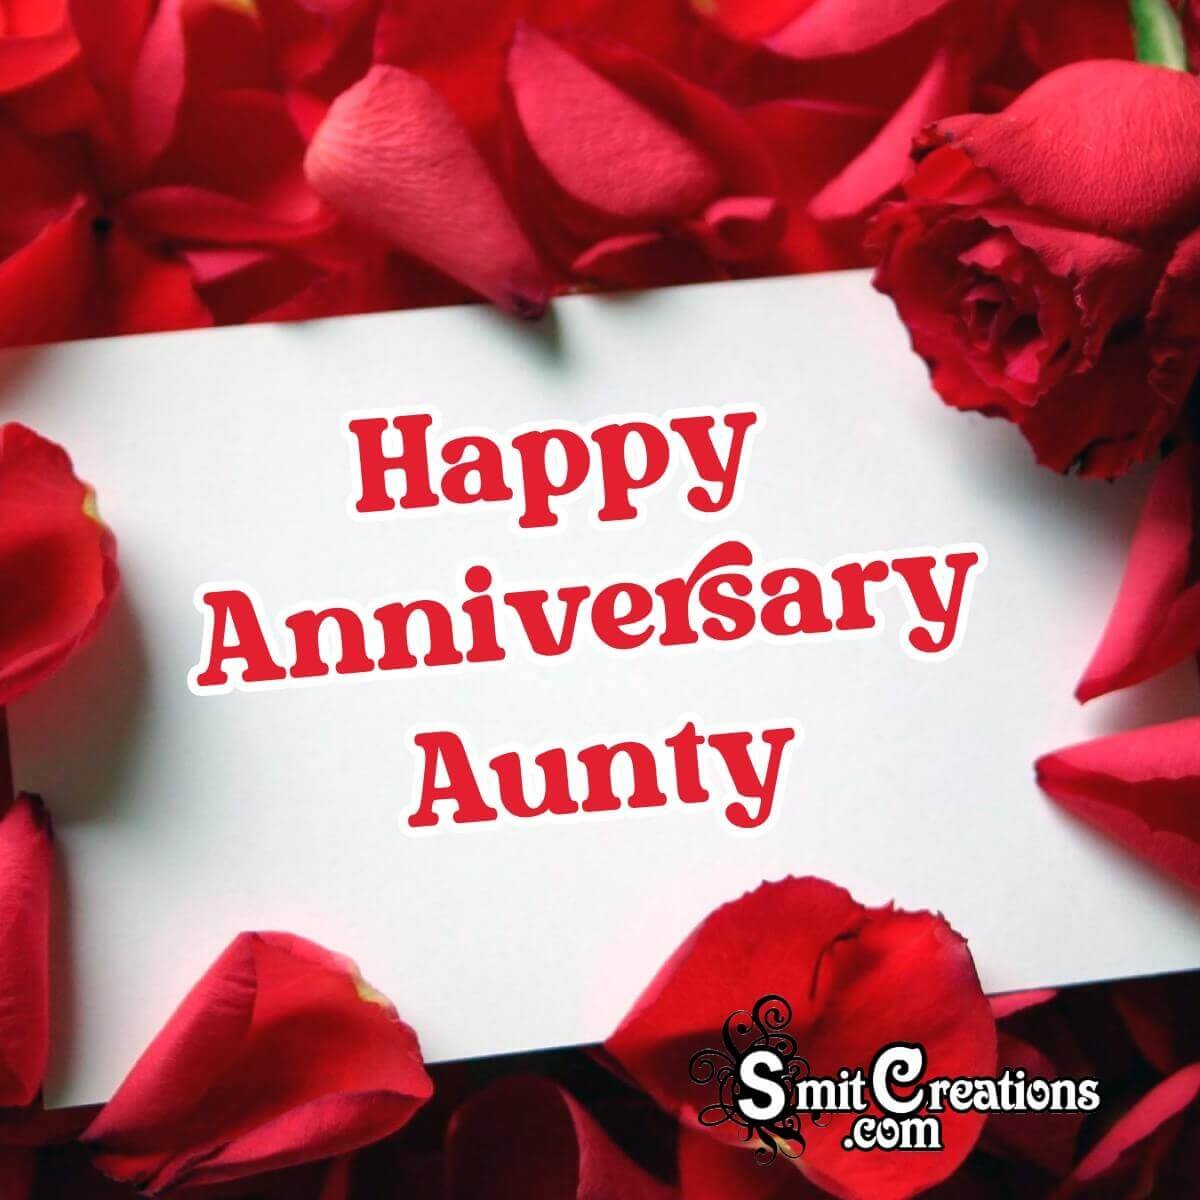 Awesome Anniversary Wish Pic For Aunty